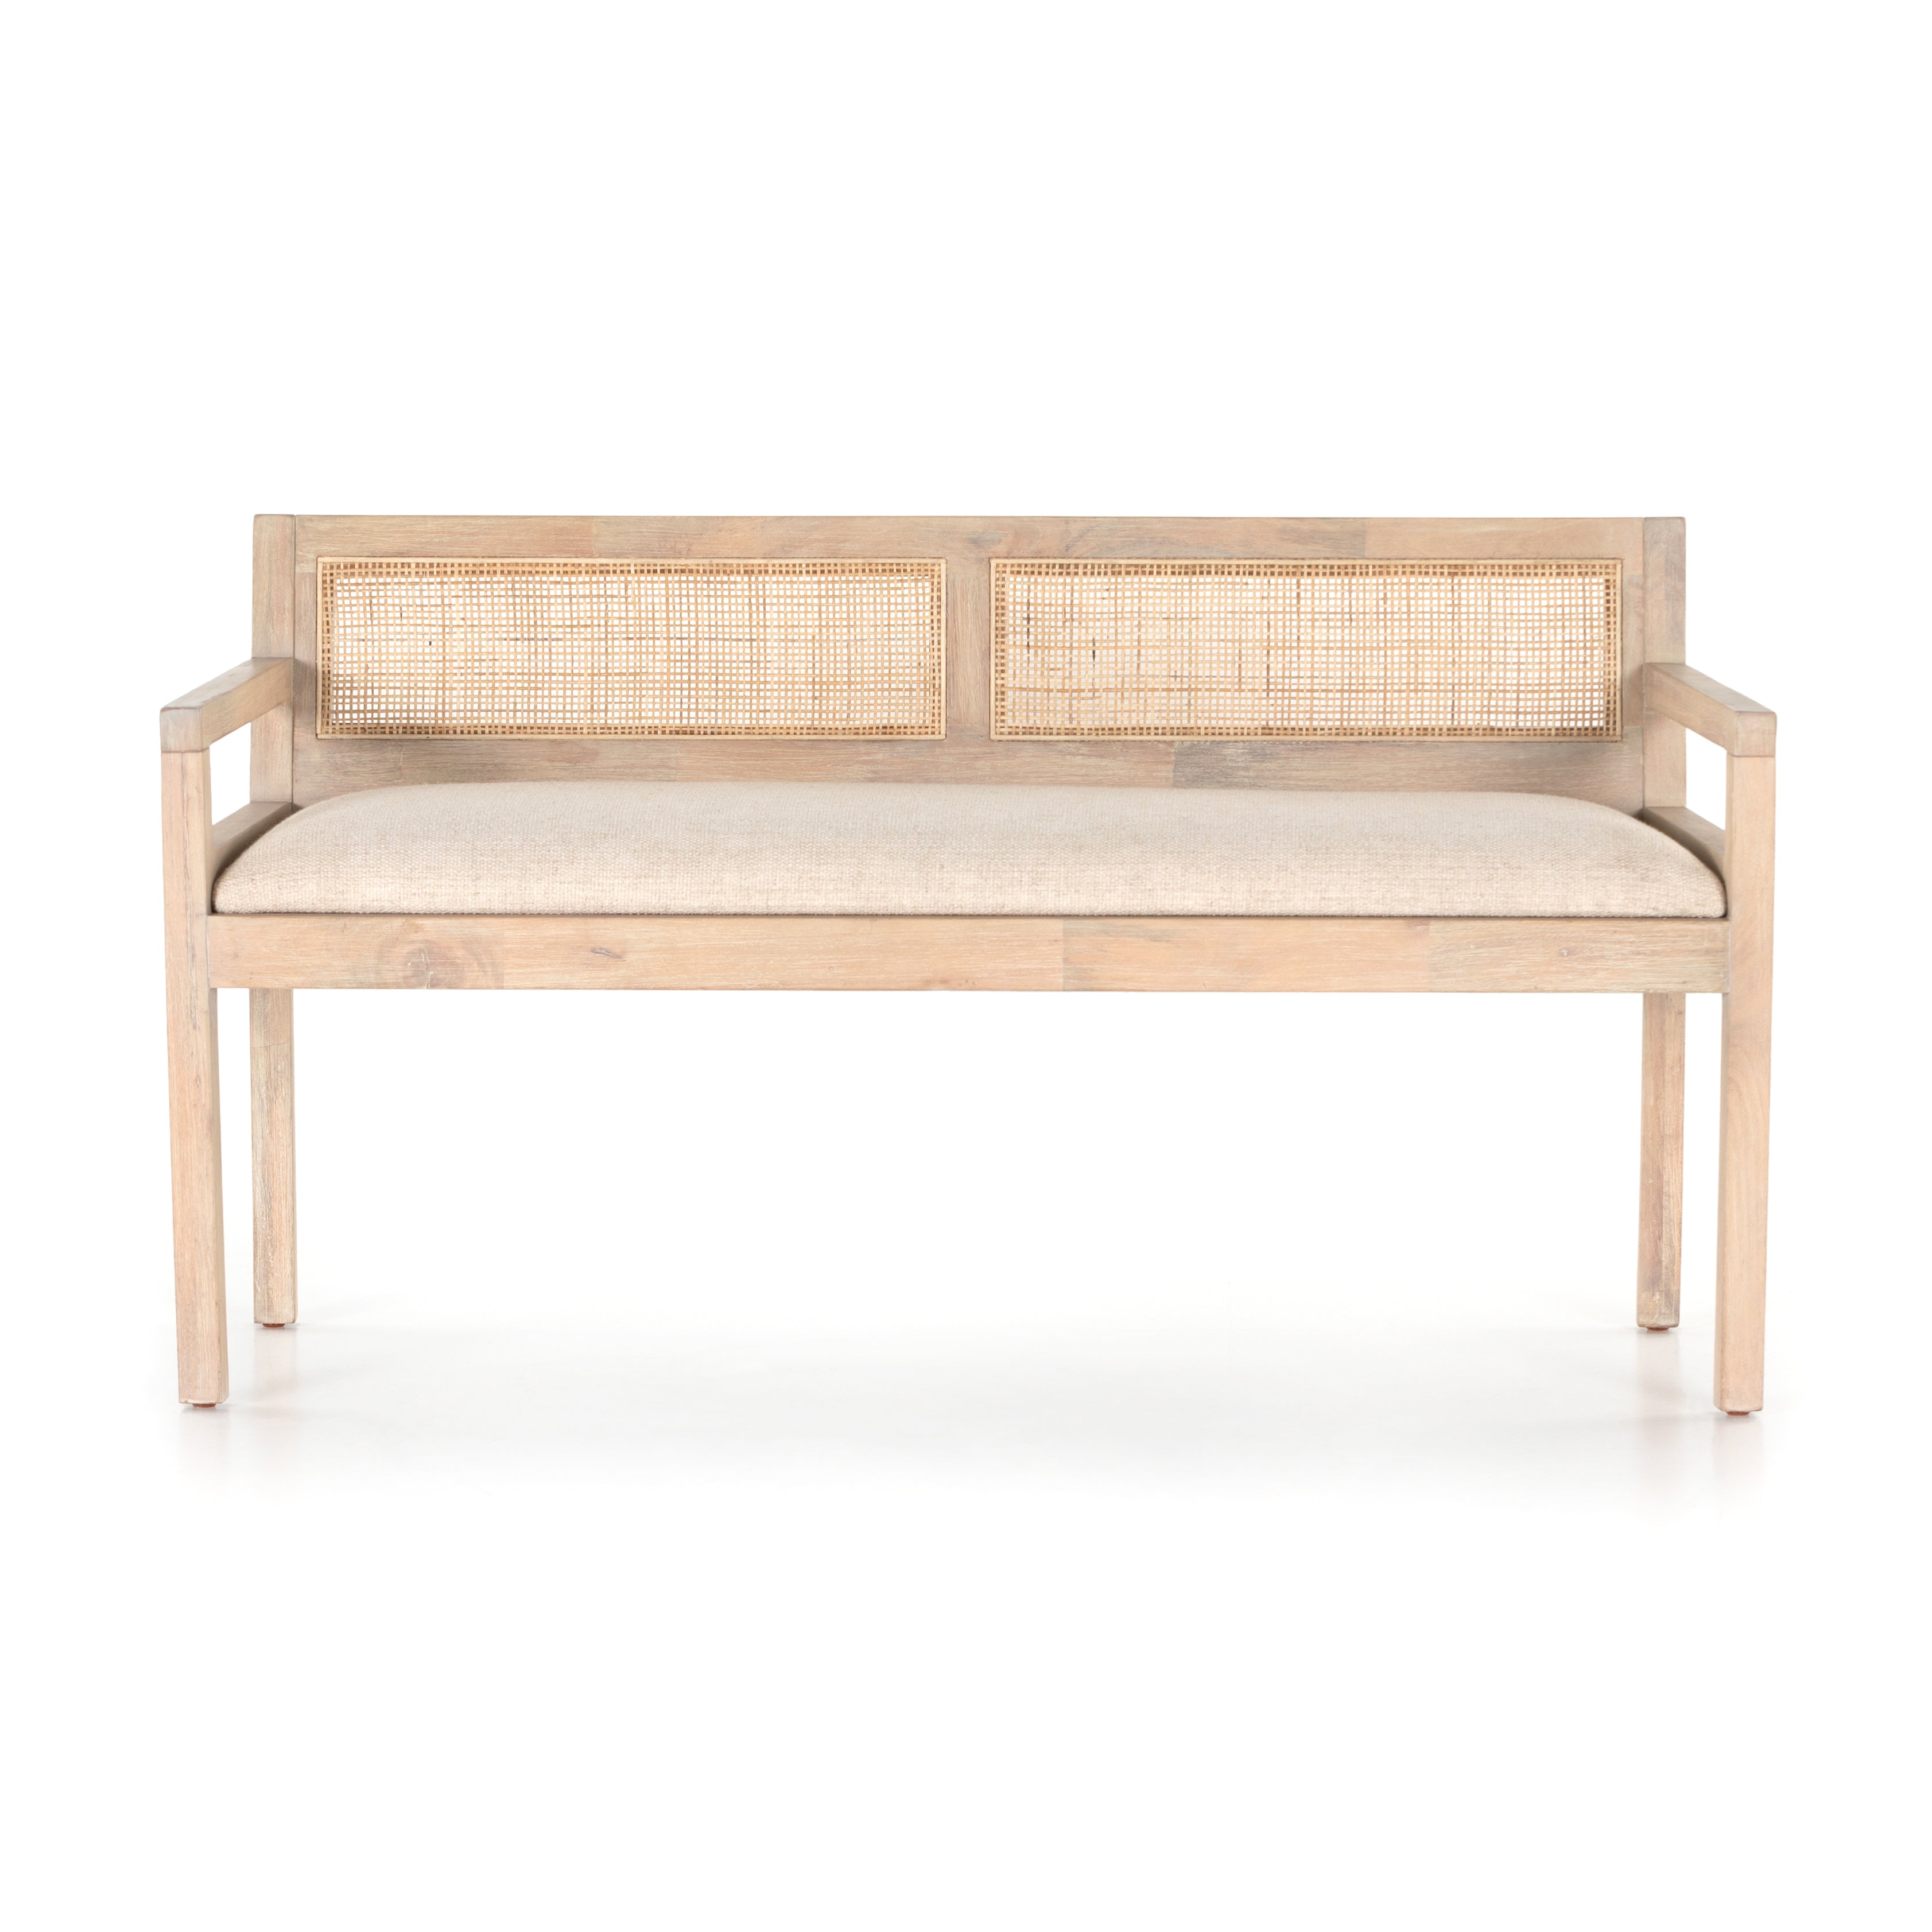 We are swooning over the mid-century inspired Clarita Accent Bench - White Wash Mango with it's natural cane and gorgeous white wash mango frame. A perfect place to sit and drink your coffee or have some extra seating for your guests.   Overall Dimensions: 54.00"w x 19.75"d x 28.75"h